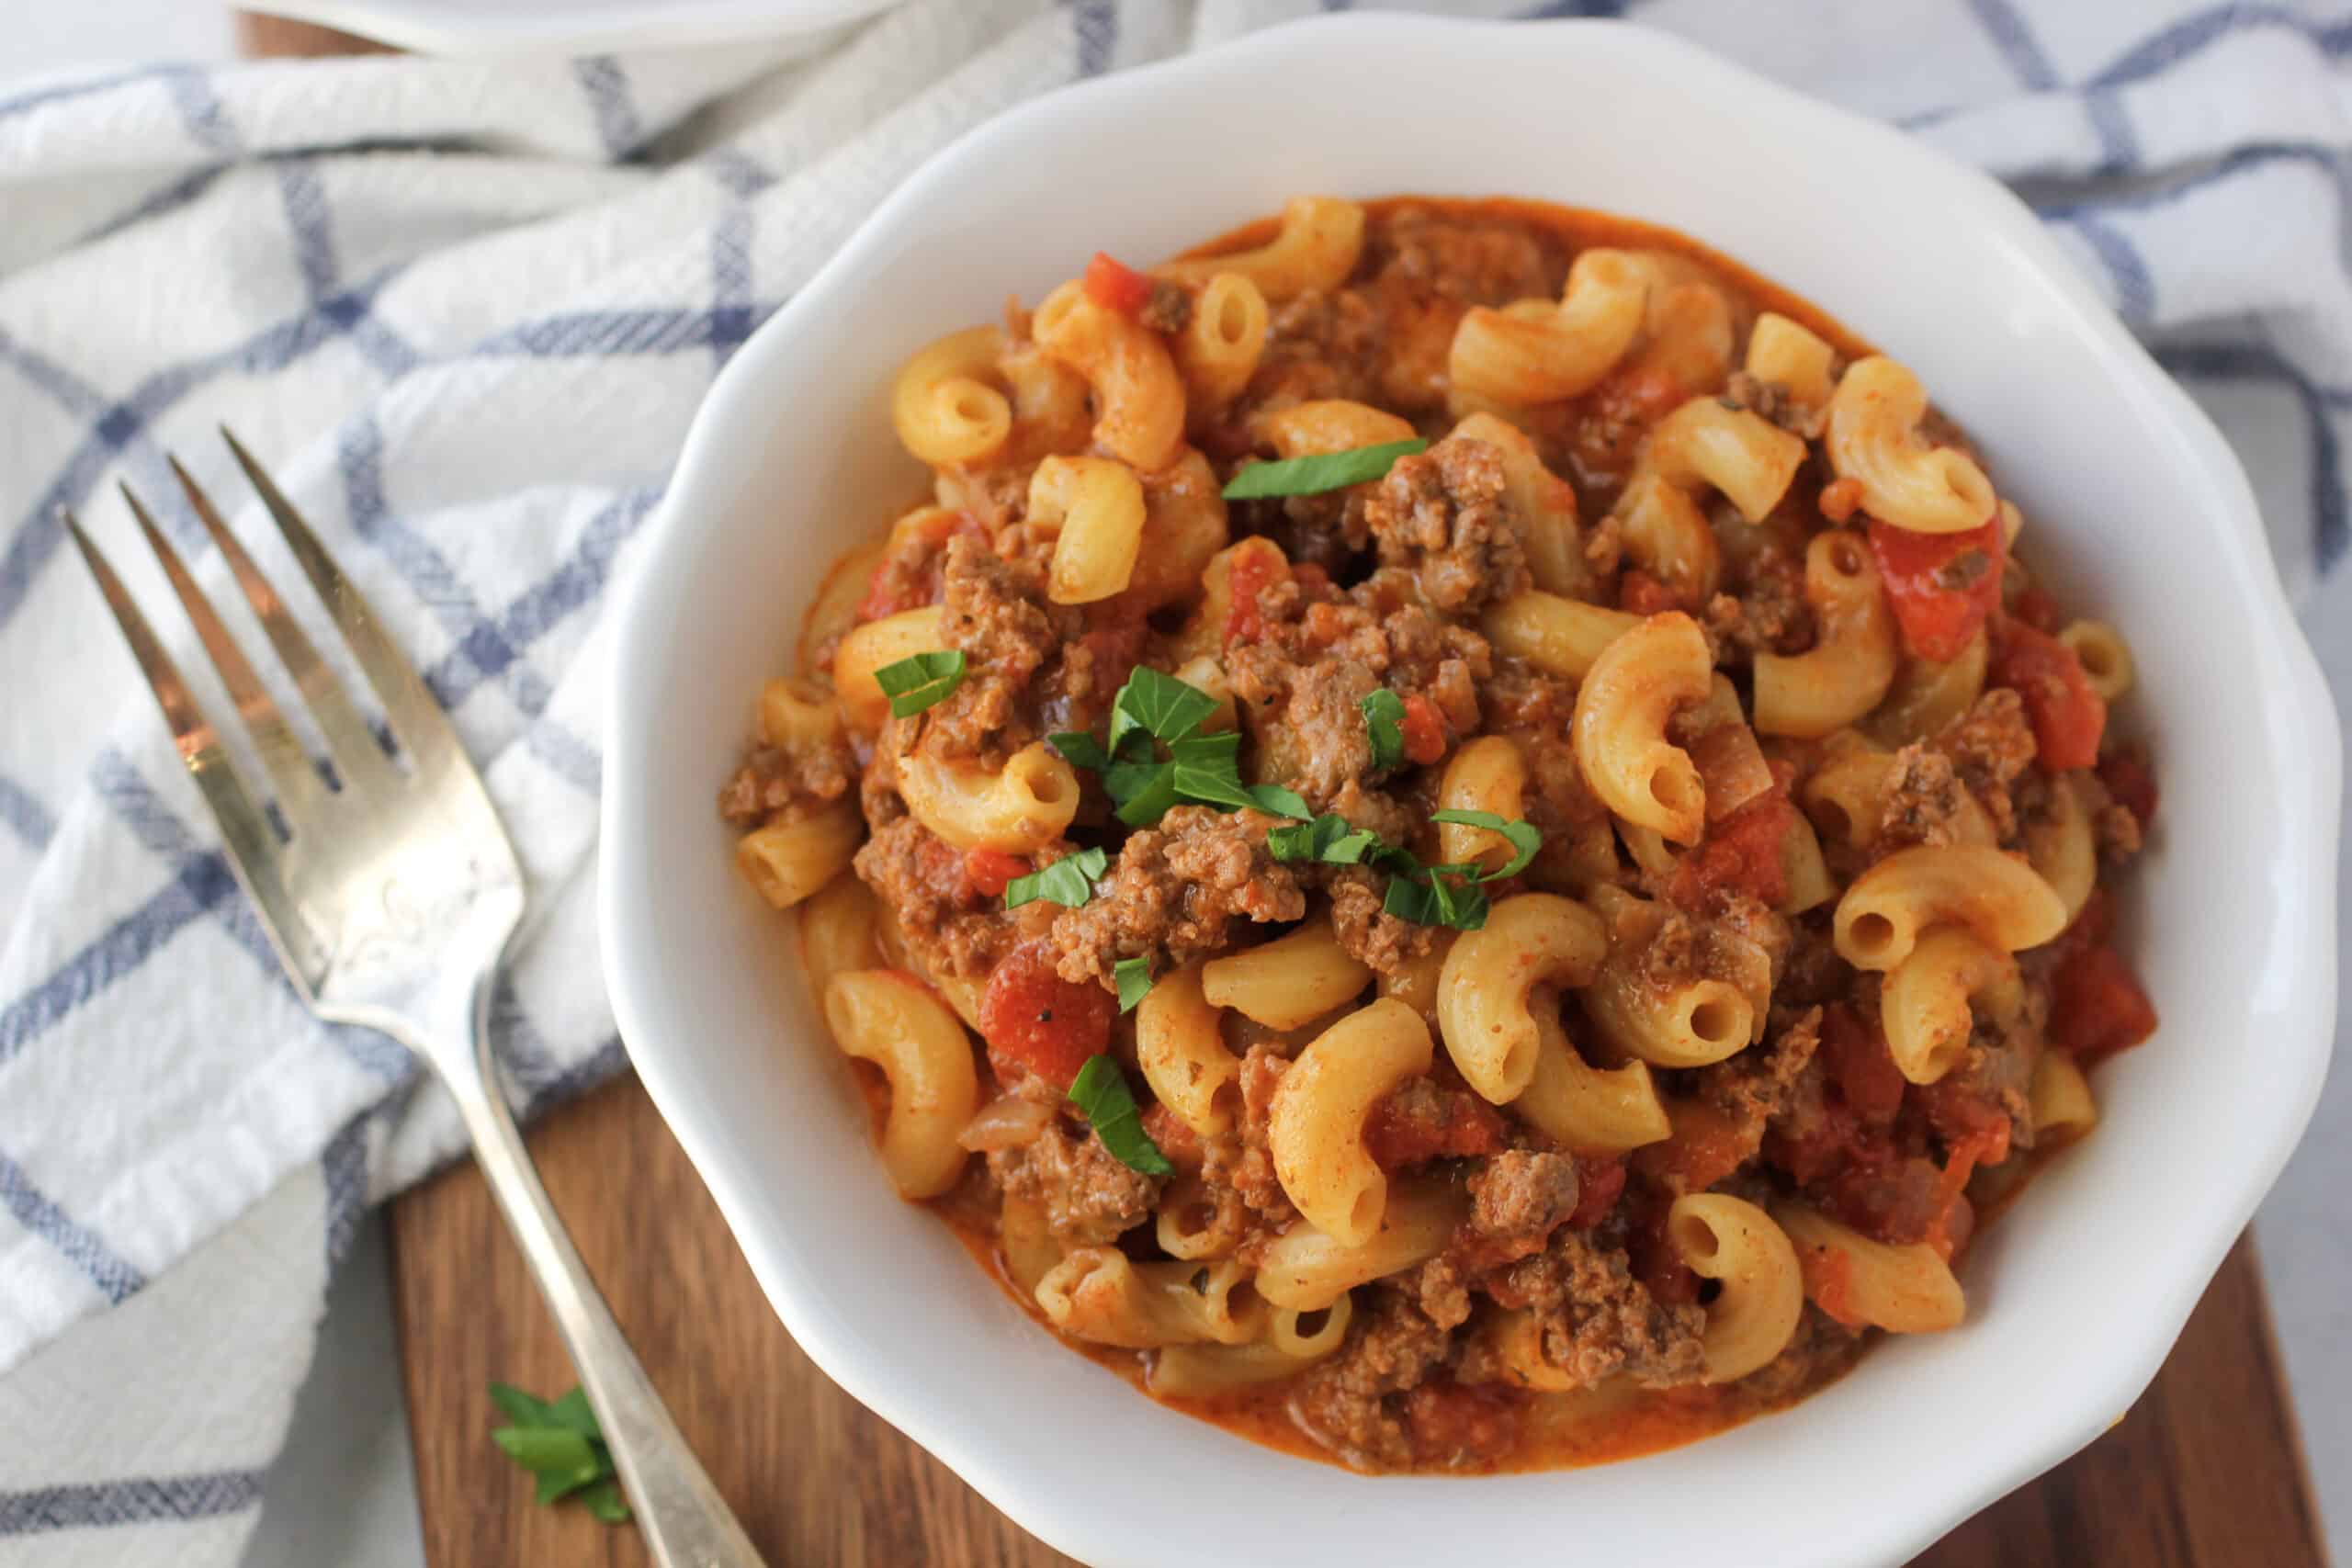 ground beef and noodles in a tomato sauce that make traditional goulash recipe